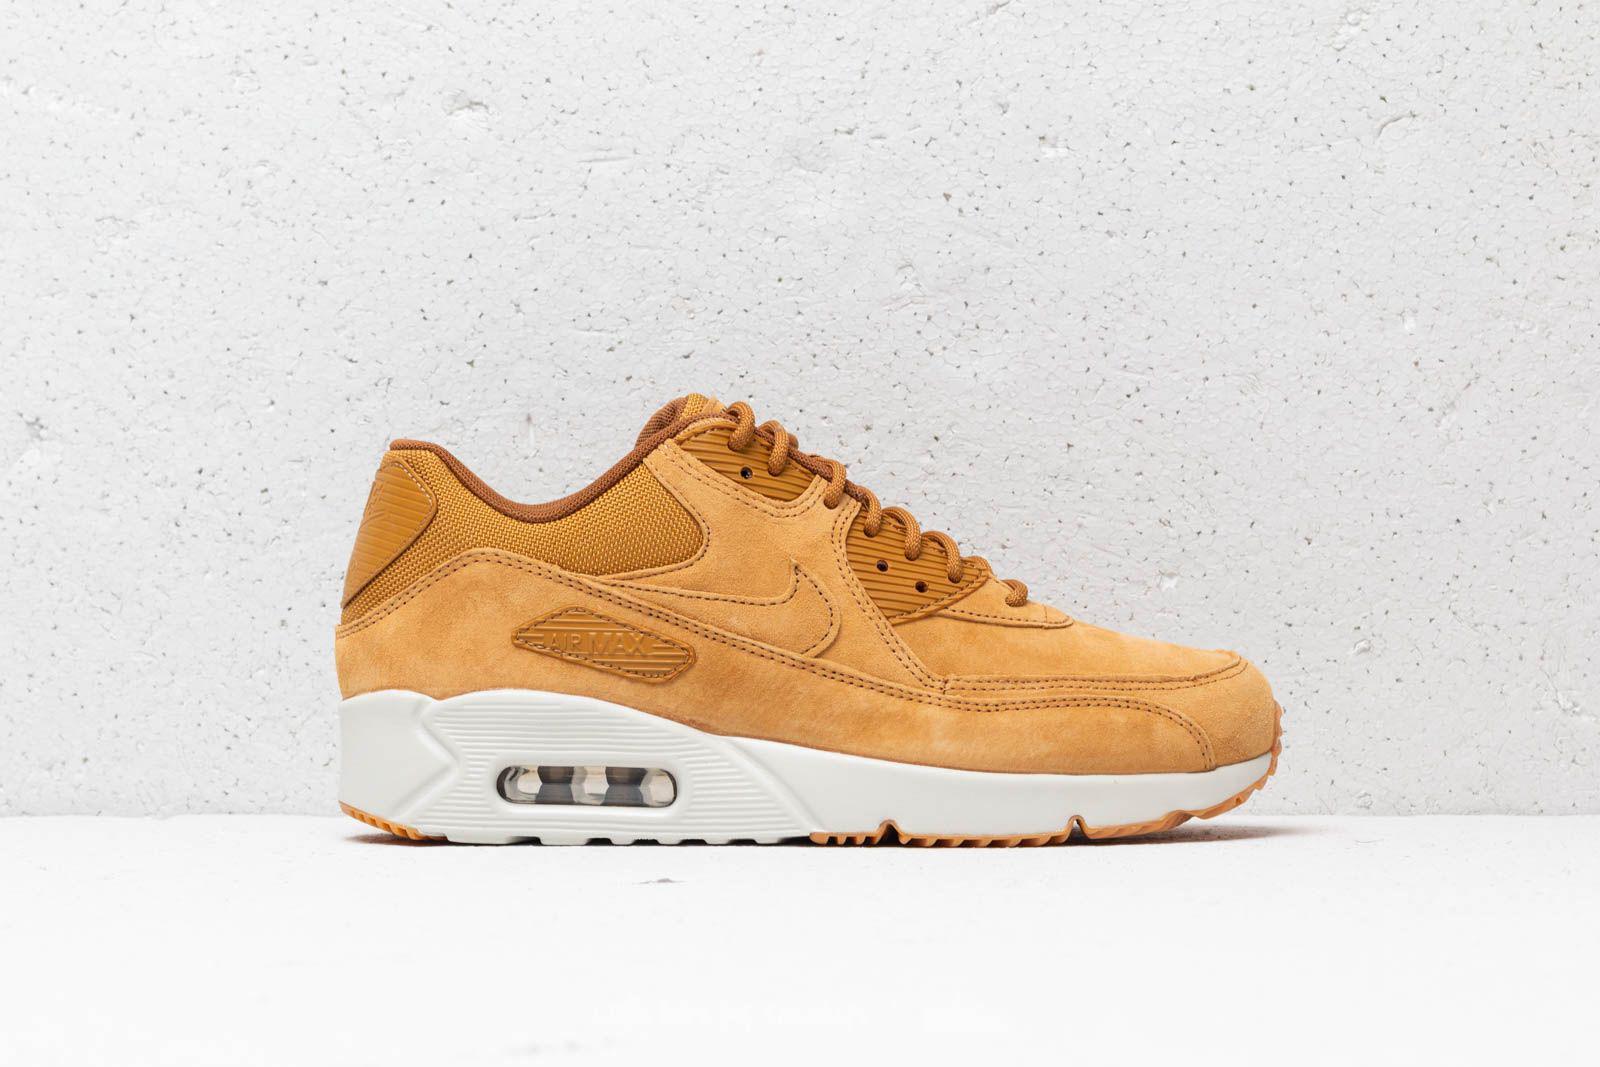 Nike Synthetic Air Max 90 Ultra 2.0 Leather Wheat/ Wheat-light ... جريني